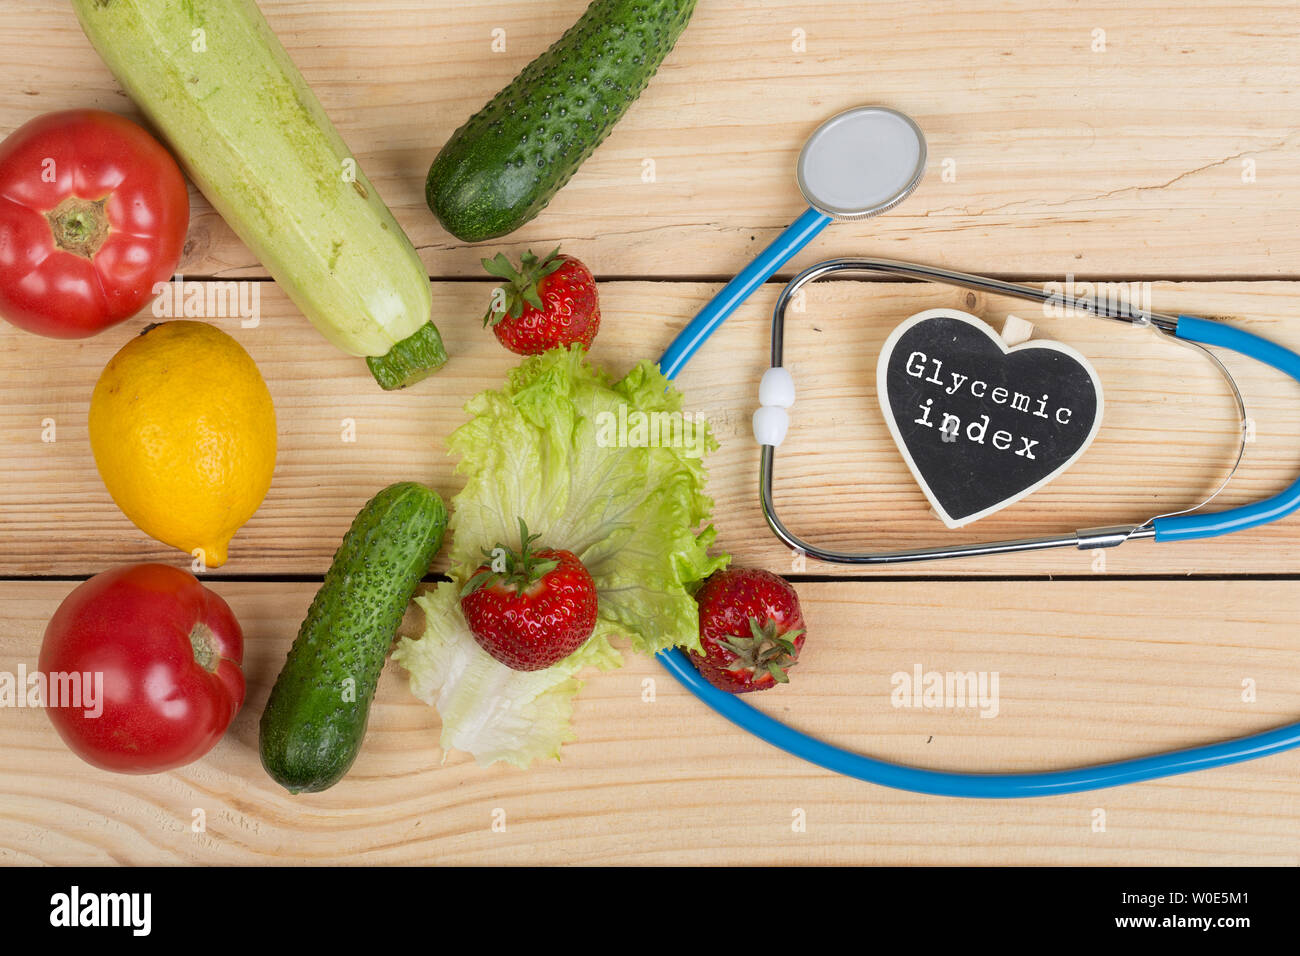 Good healthy and diet concept - Blackboard in shape of heart with text Glycemic index, stethoscope, vegetables, fruits and berries on wooden table Stock Photo